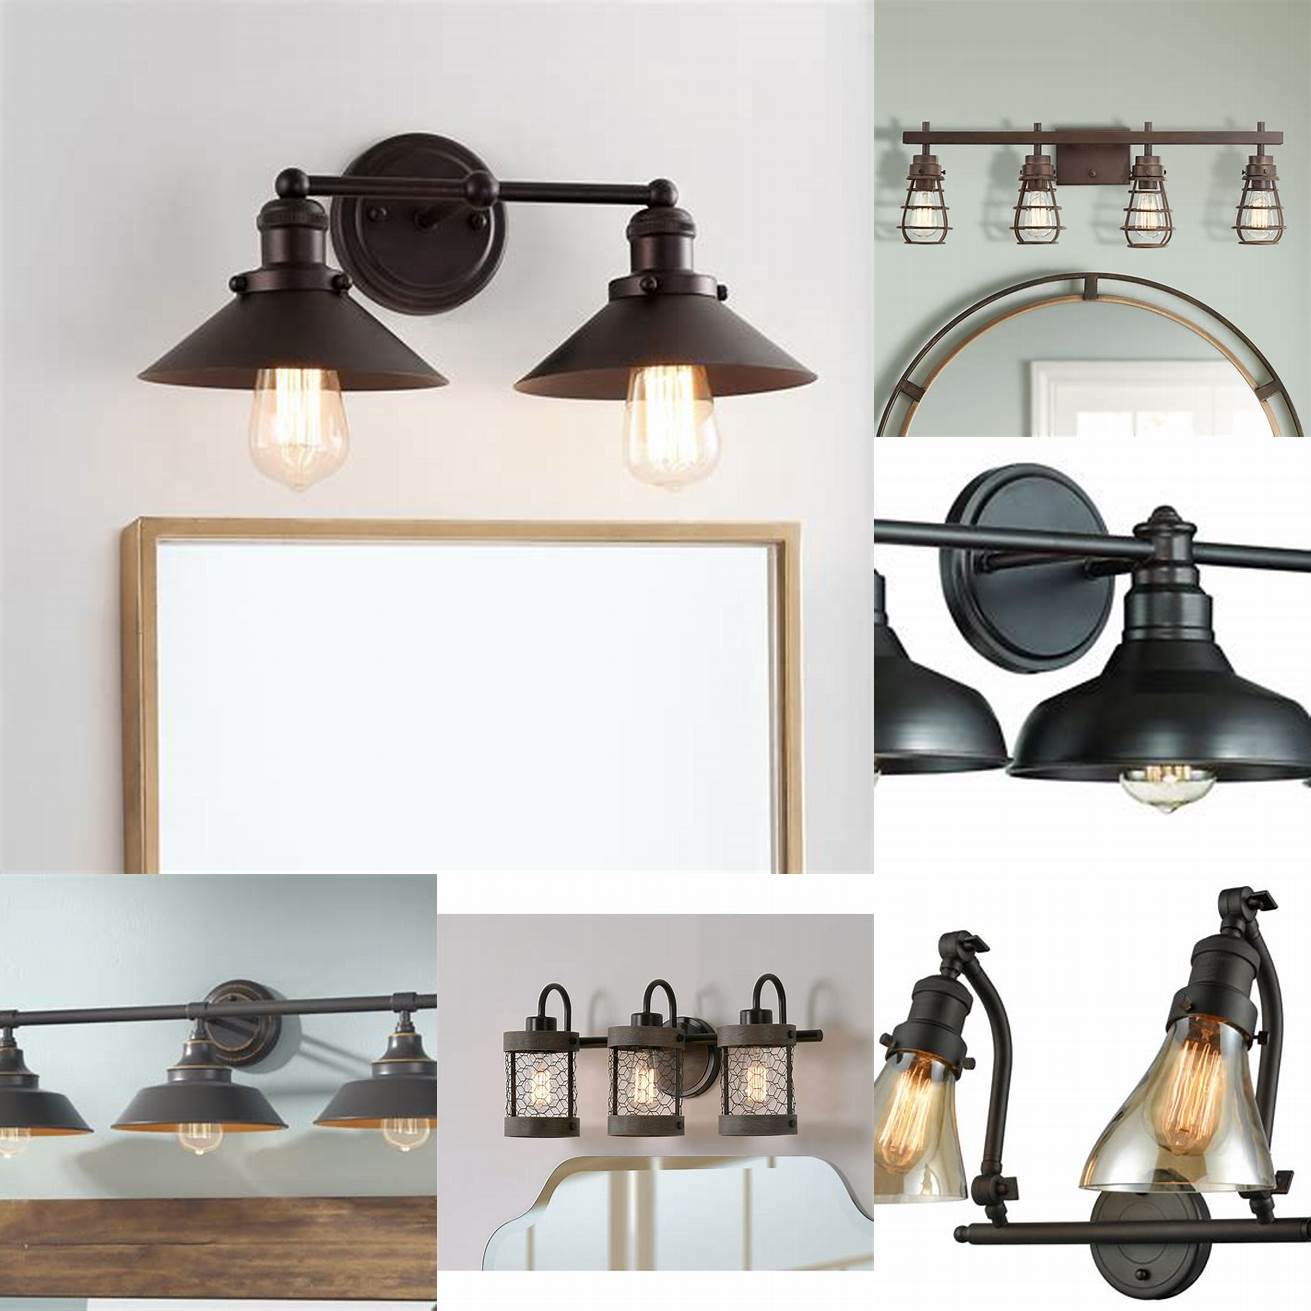 This industrial-style oil rubbed bronze vanity light features exposed bulbs and a vintage-inspired design